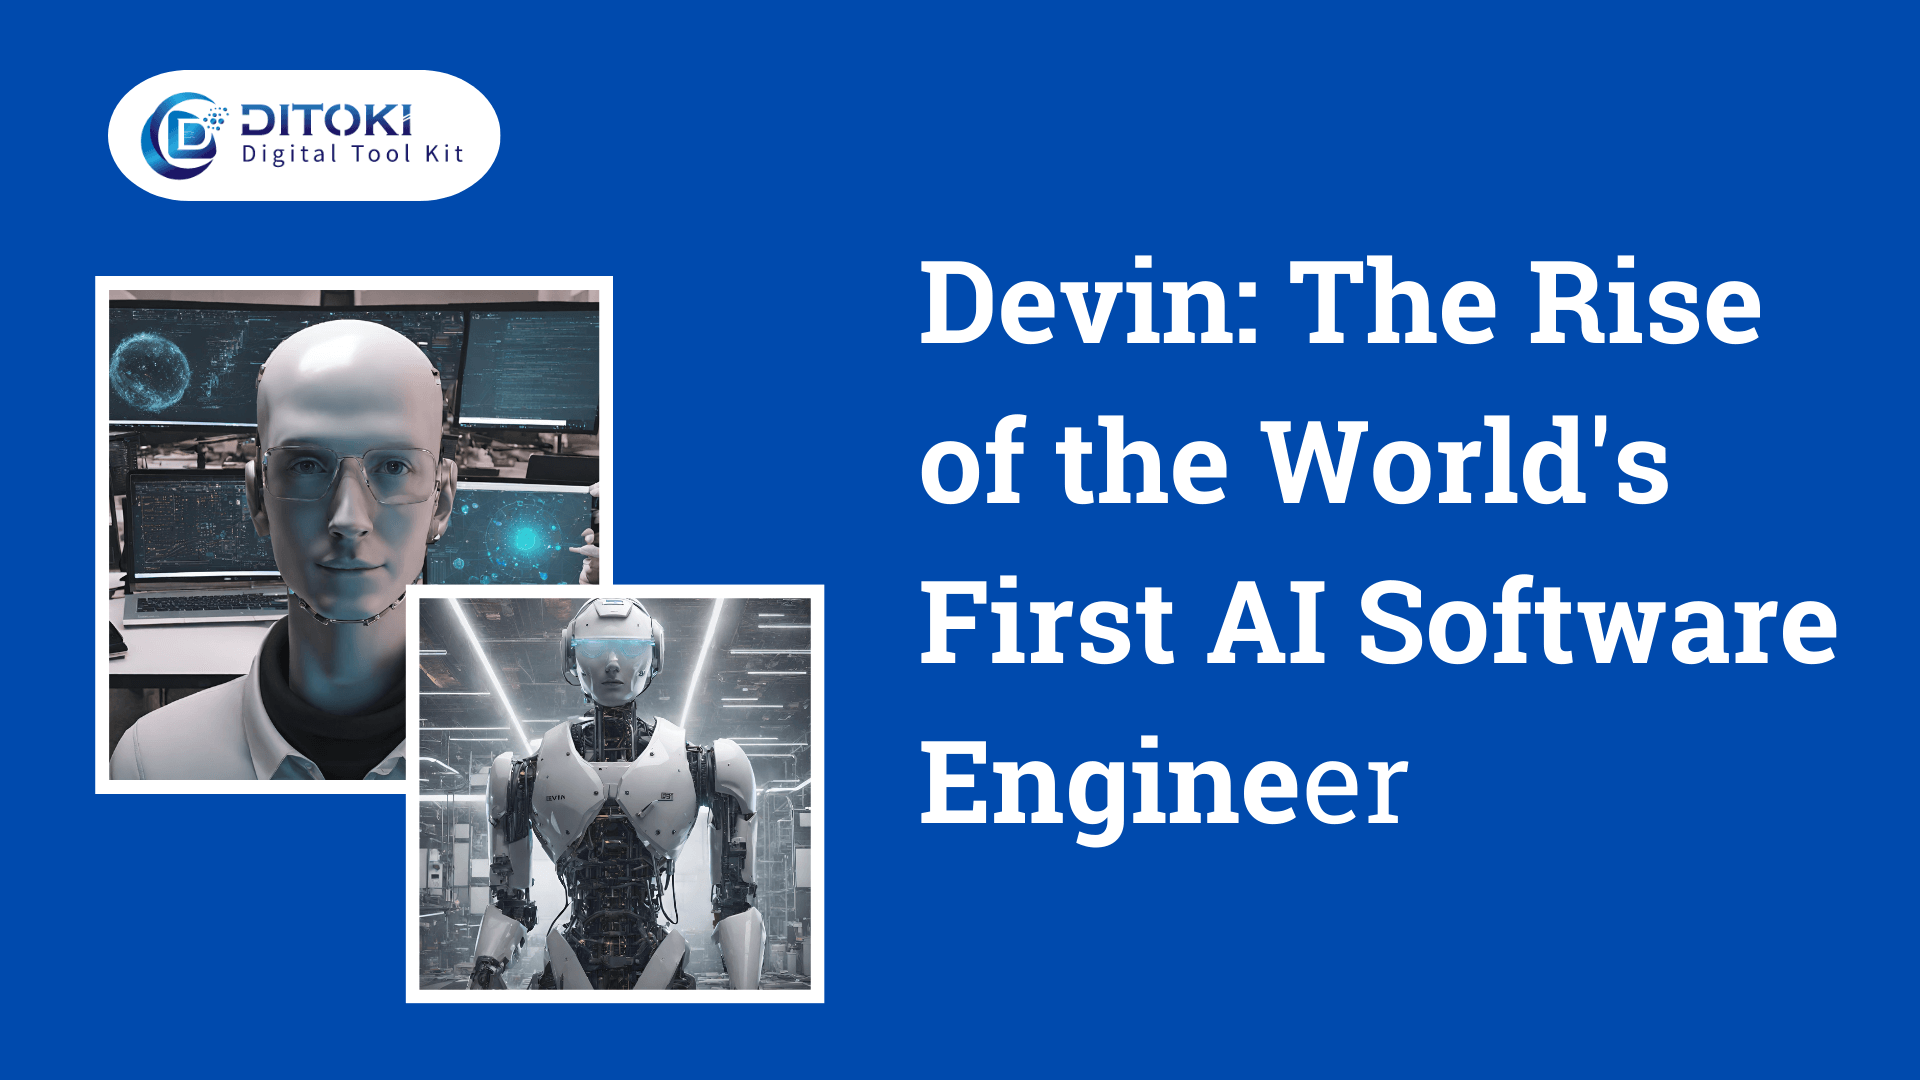 Devin: The Rise of the World's First AI Software Engineer